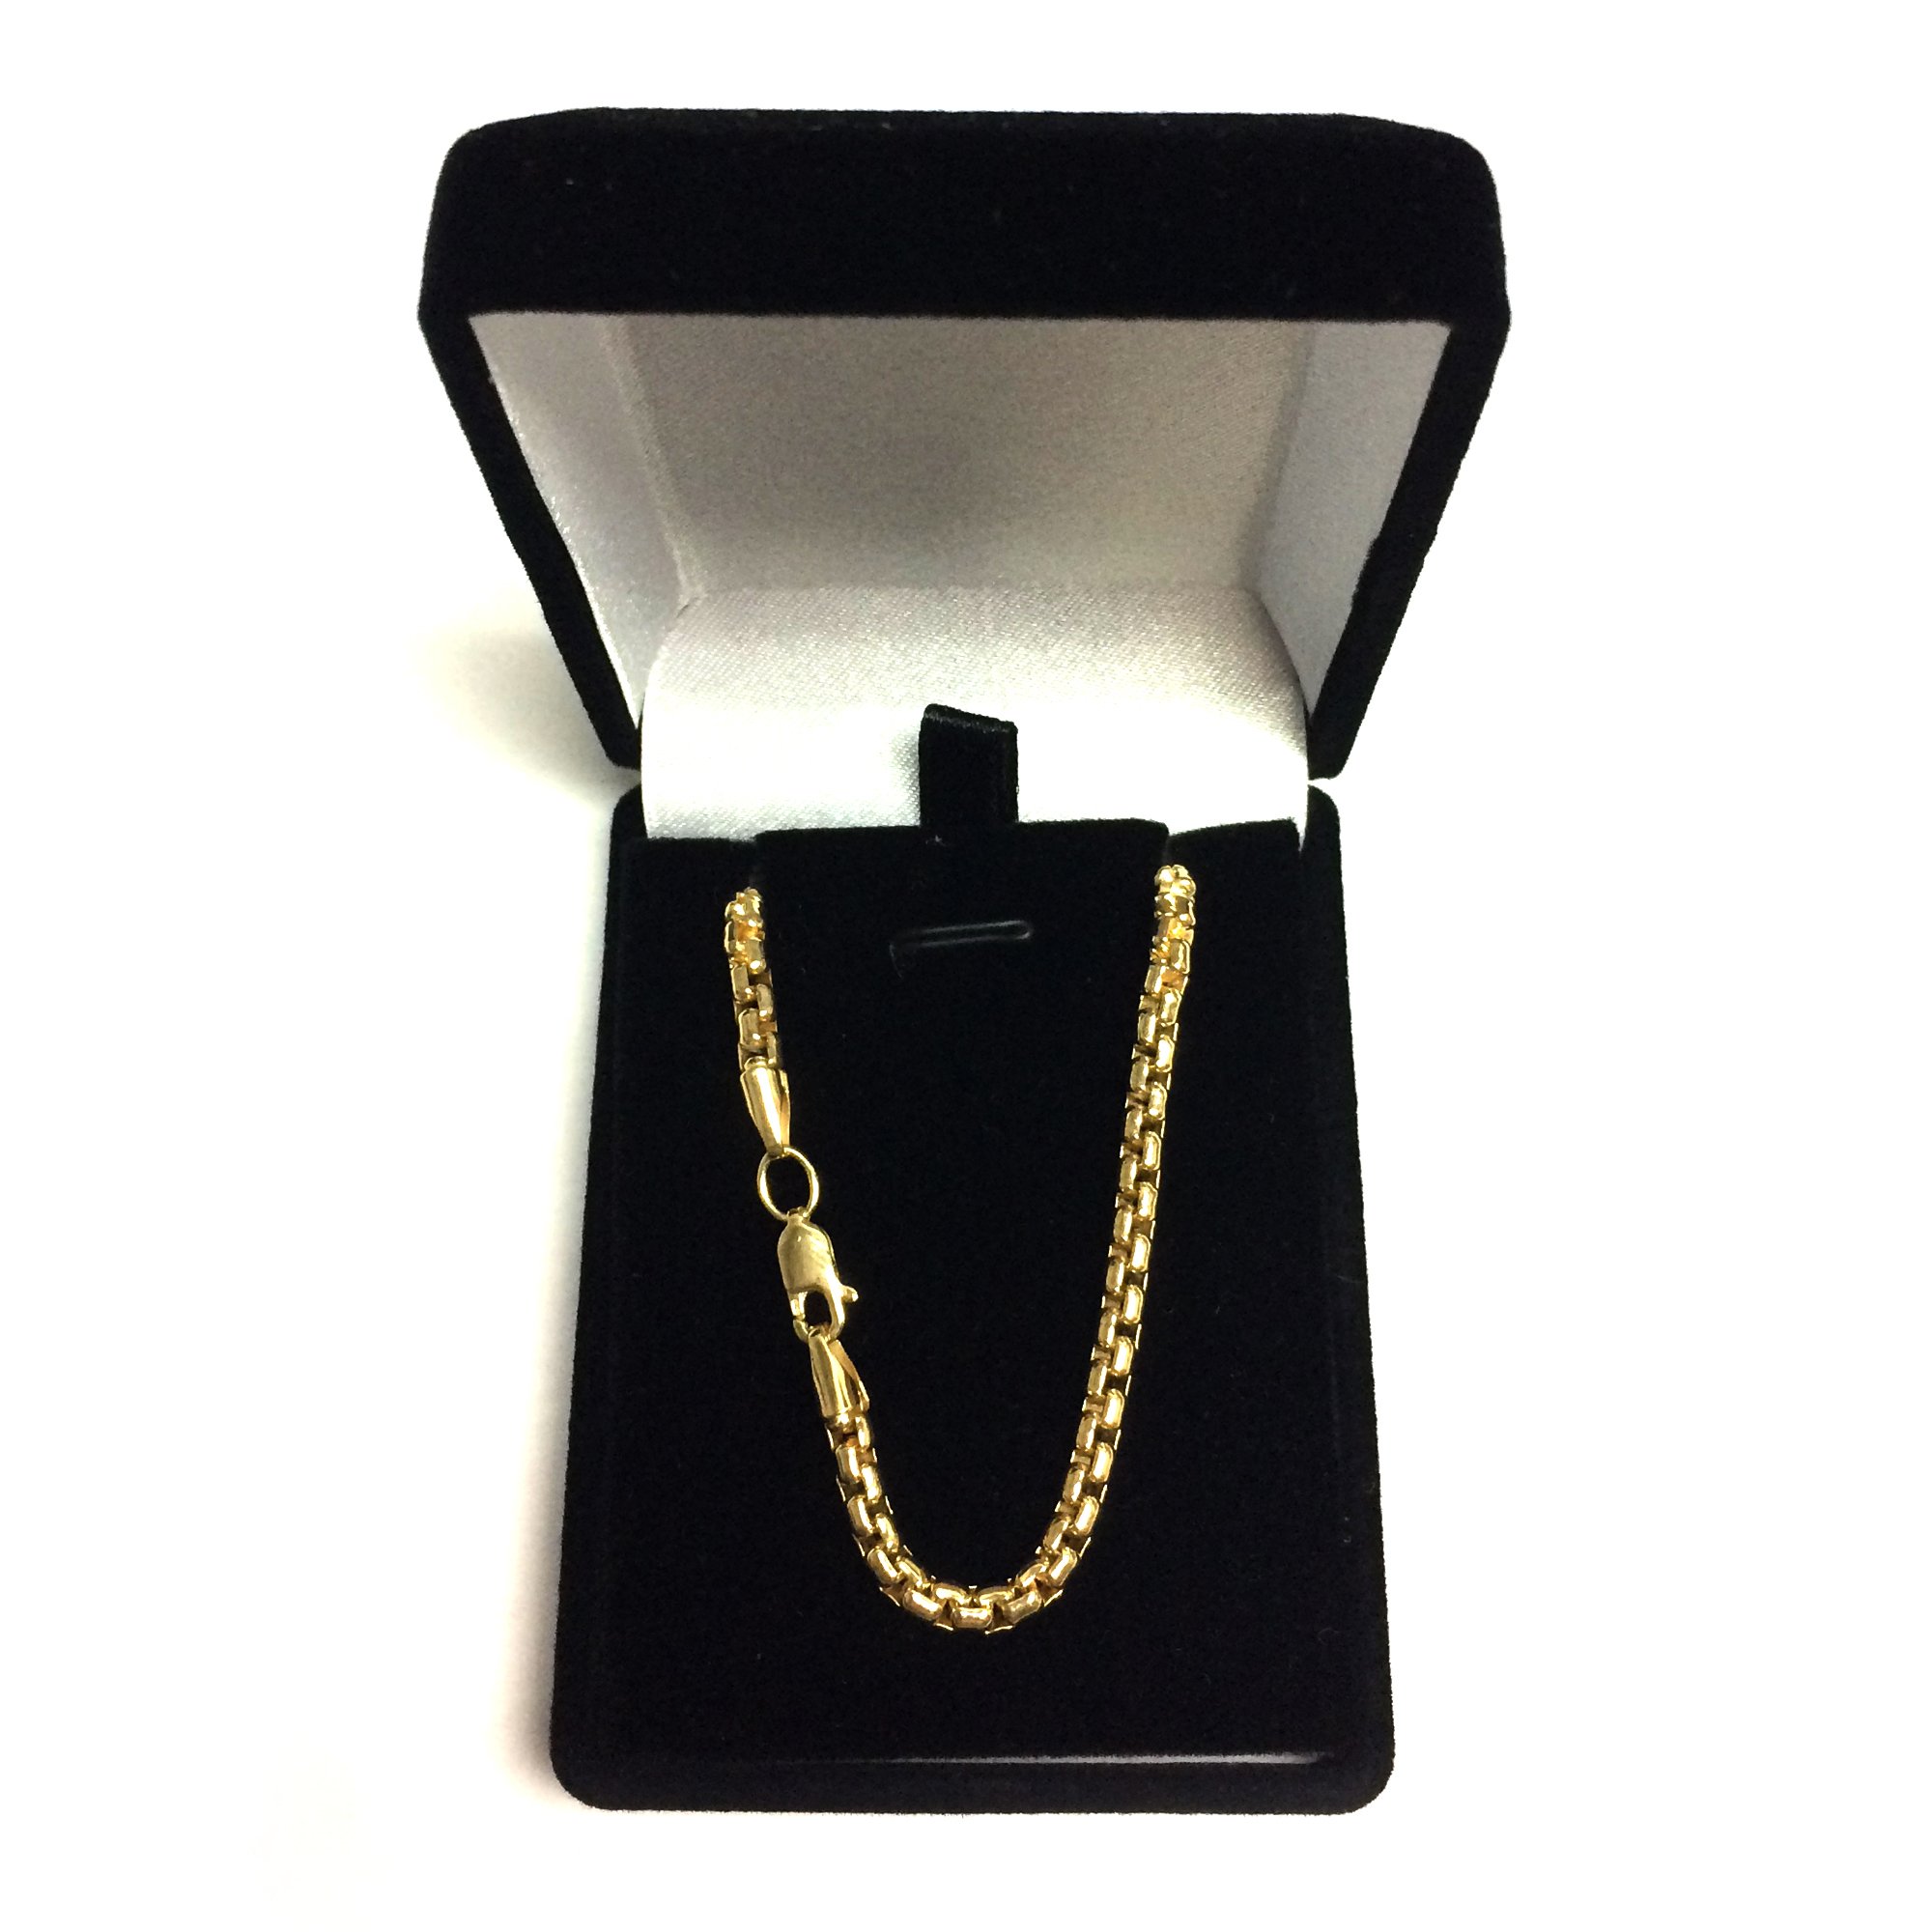 Jewelry Affairs 14K Yellow Gold Filled Round Box Chain Necklace, 3.4mm Wide